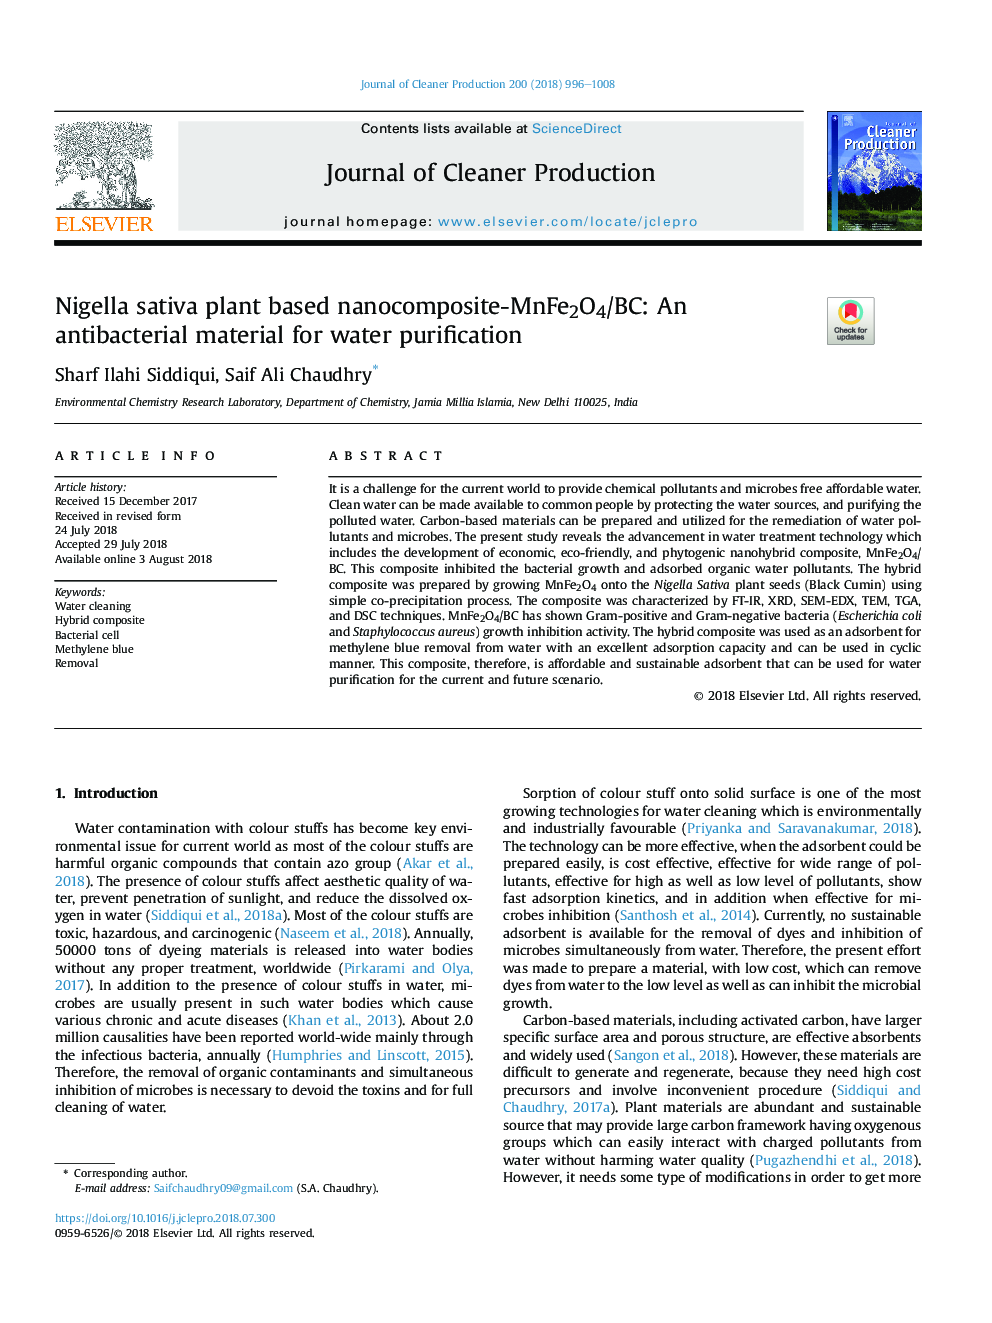 Nigella sativa plant based nanocomposite-MnFe2O4/BC: An antibacterial material for water purification